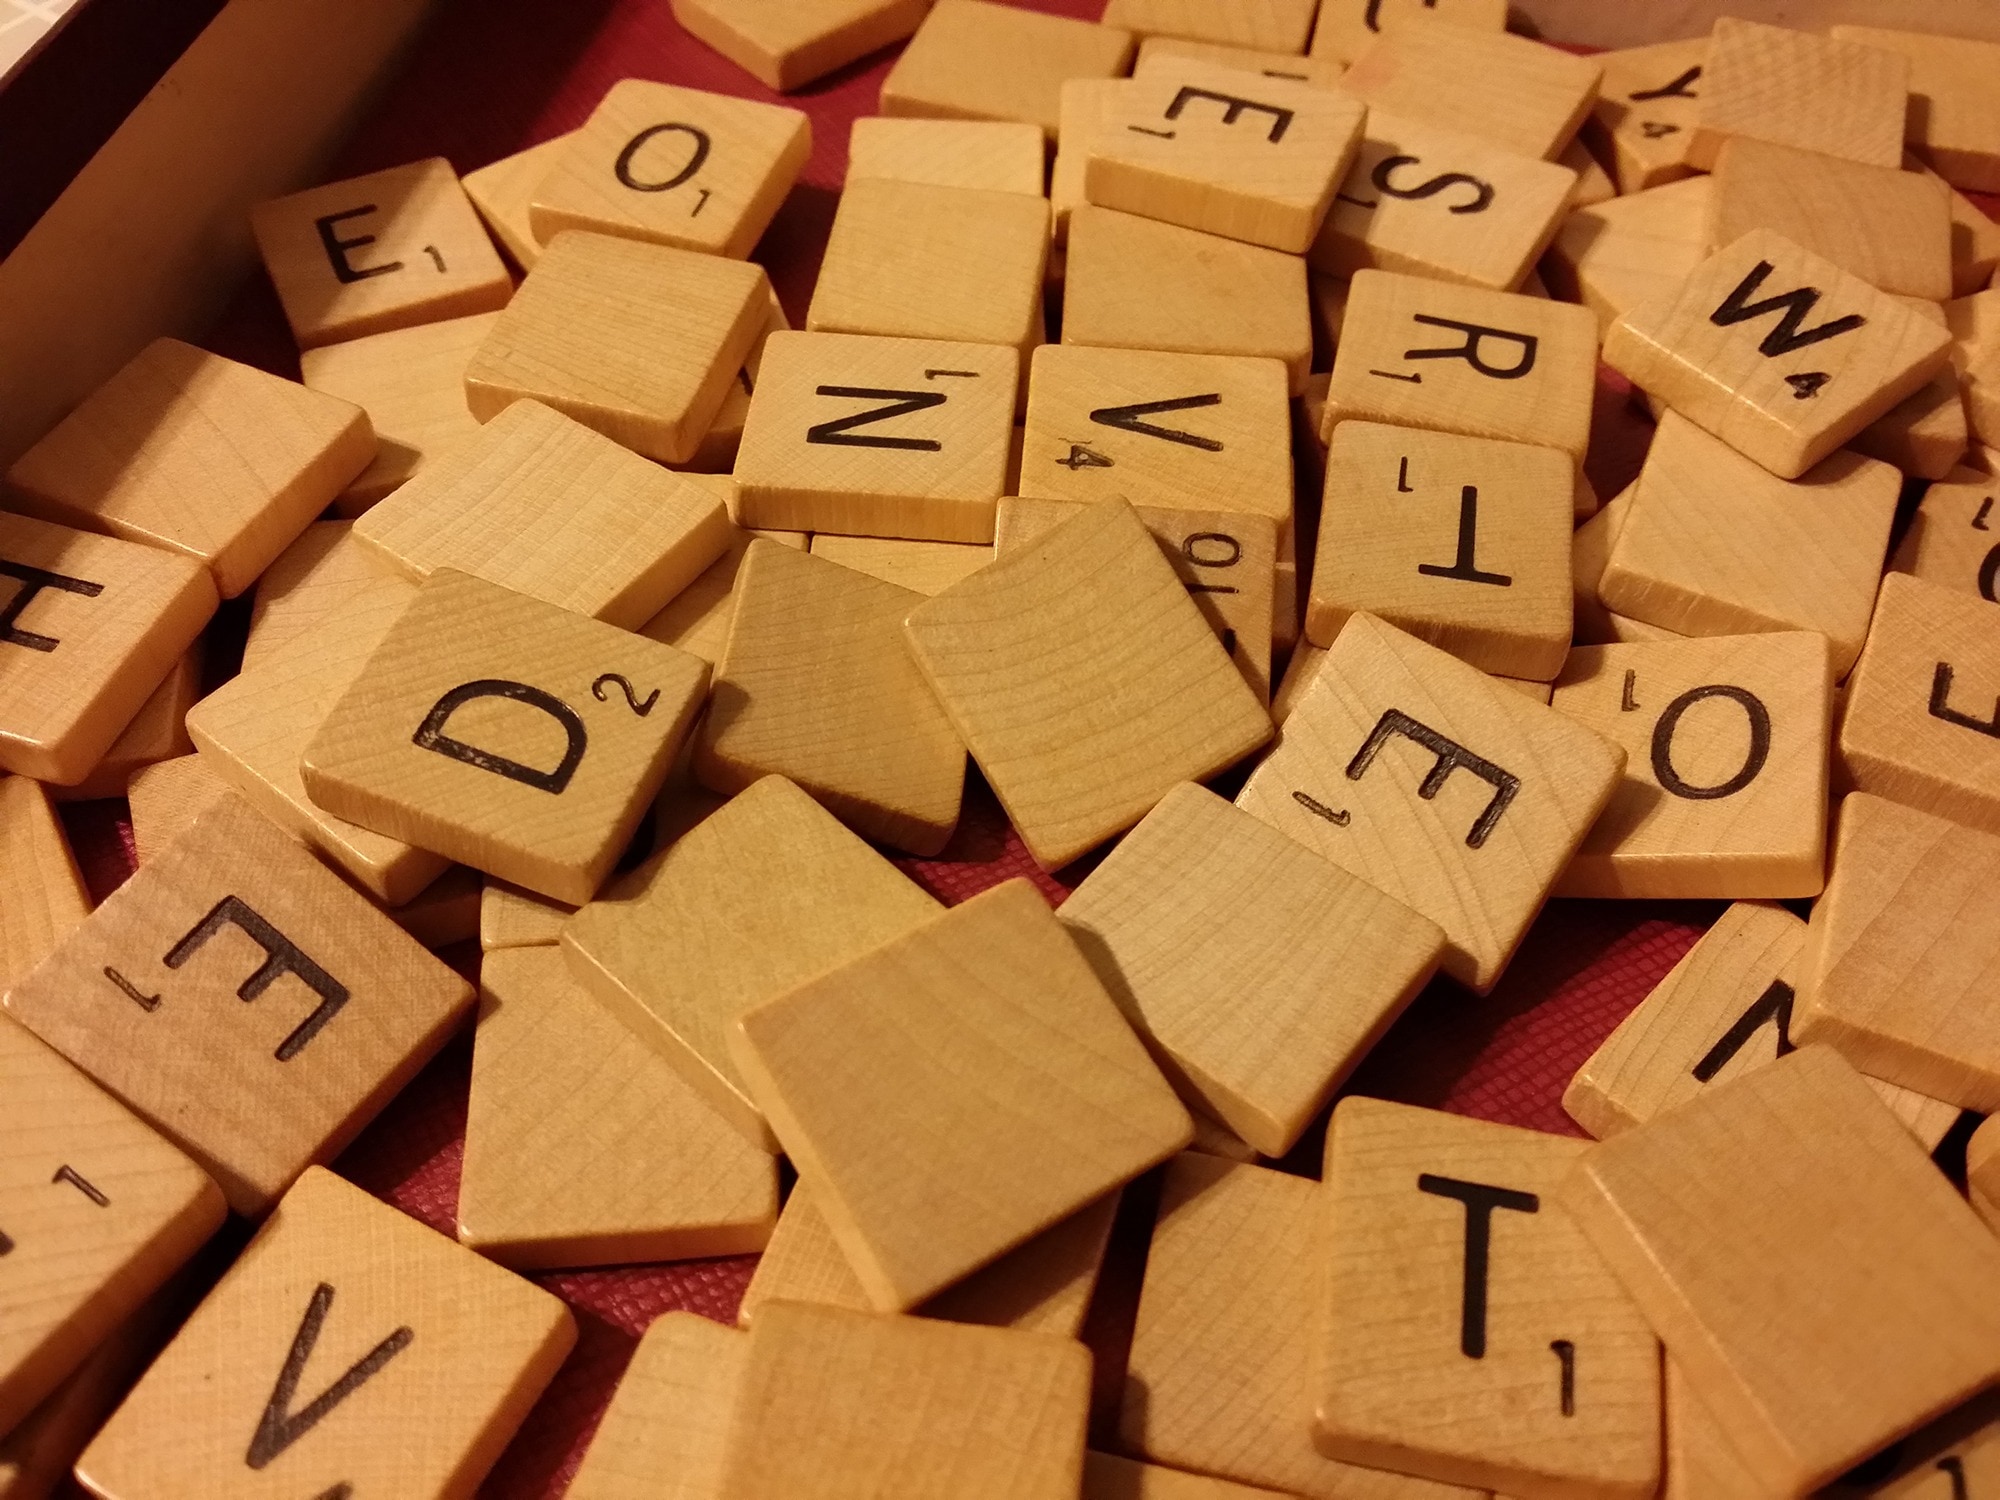 Board Game, Words, Scrabble, Game, large group of objects, full frame